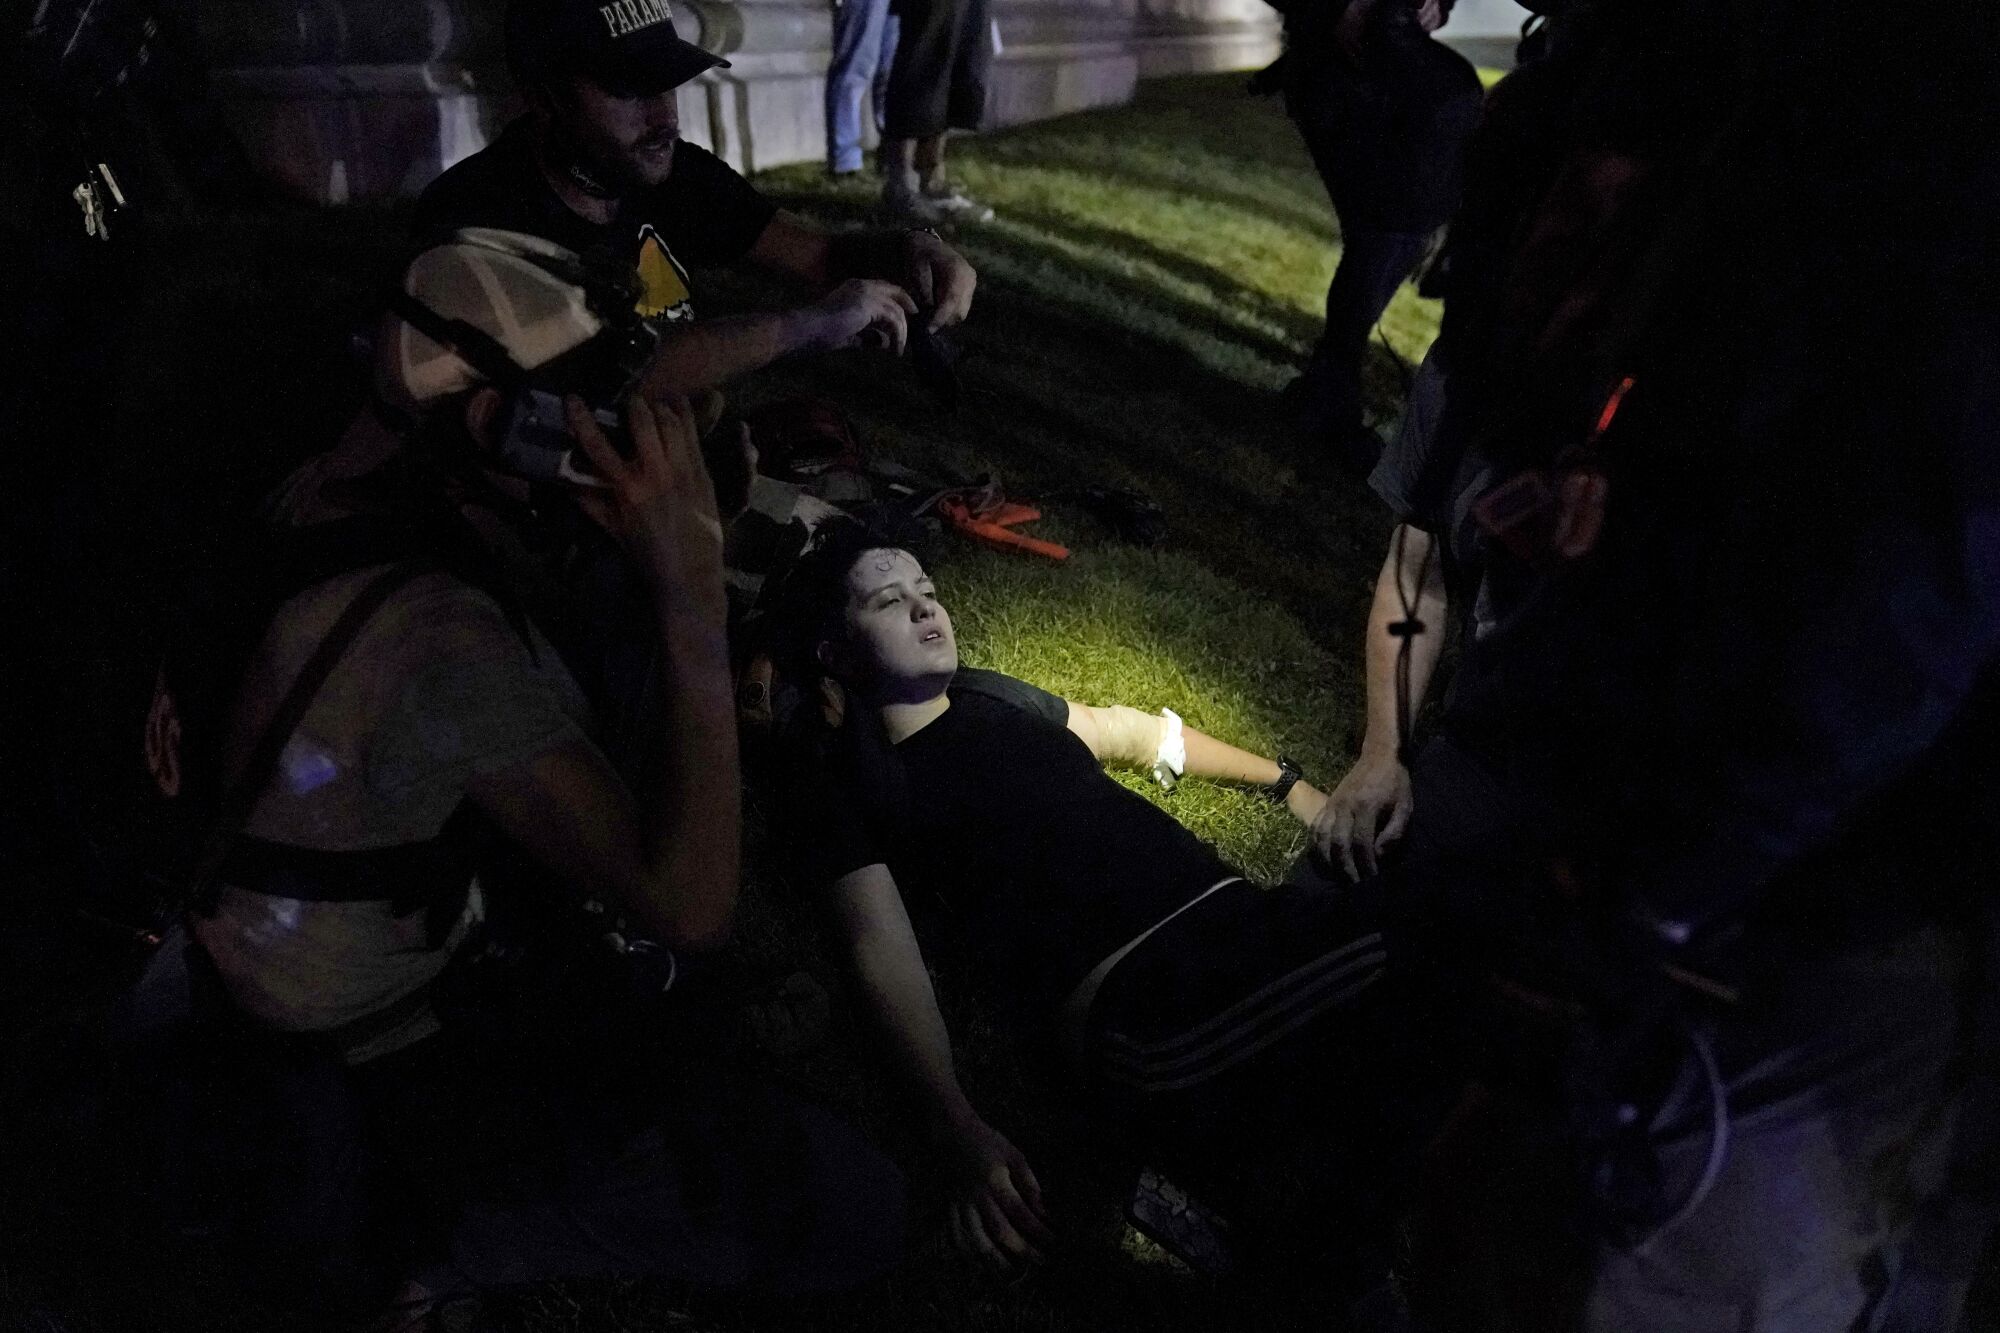 An injured protester.